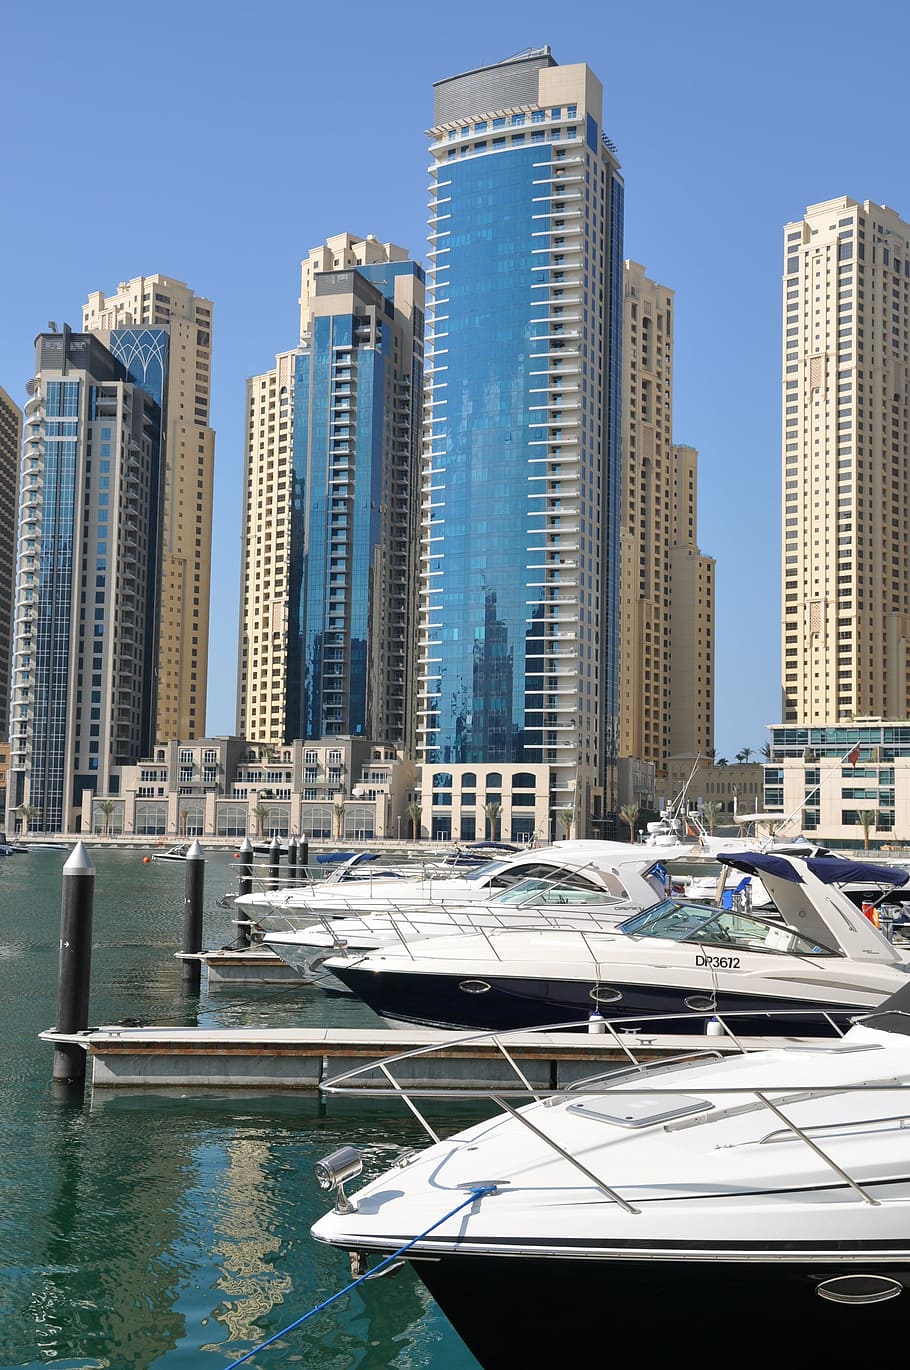 bowrider boats beside docks and buildings at distance, dubai